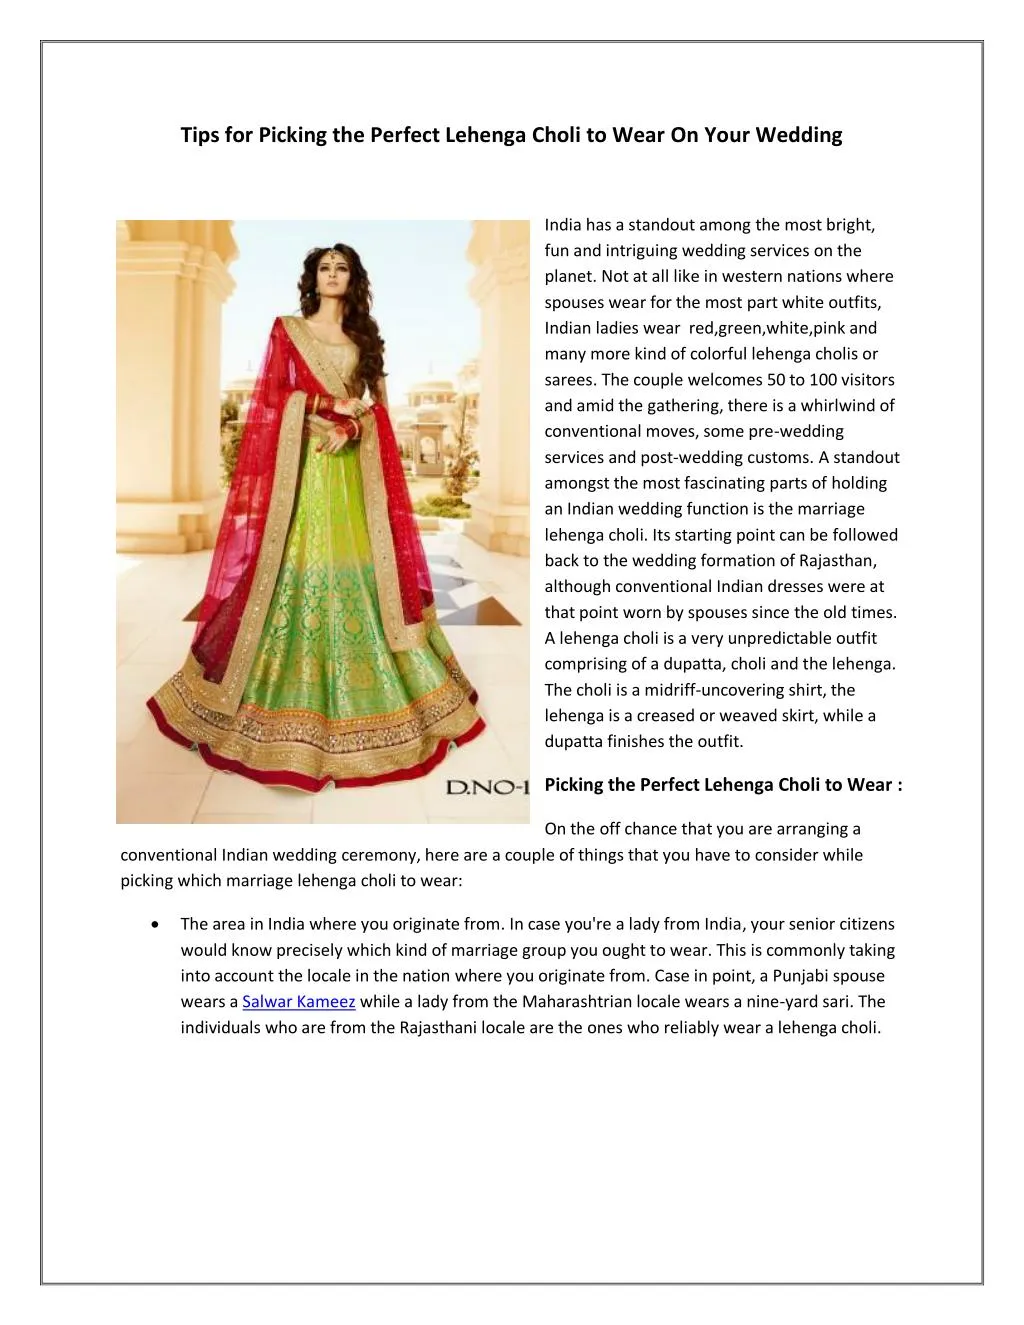 PPT - Tips for picking the perfect lehenga choli to wear on your ...